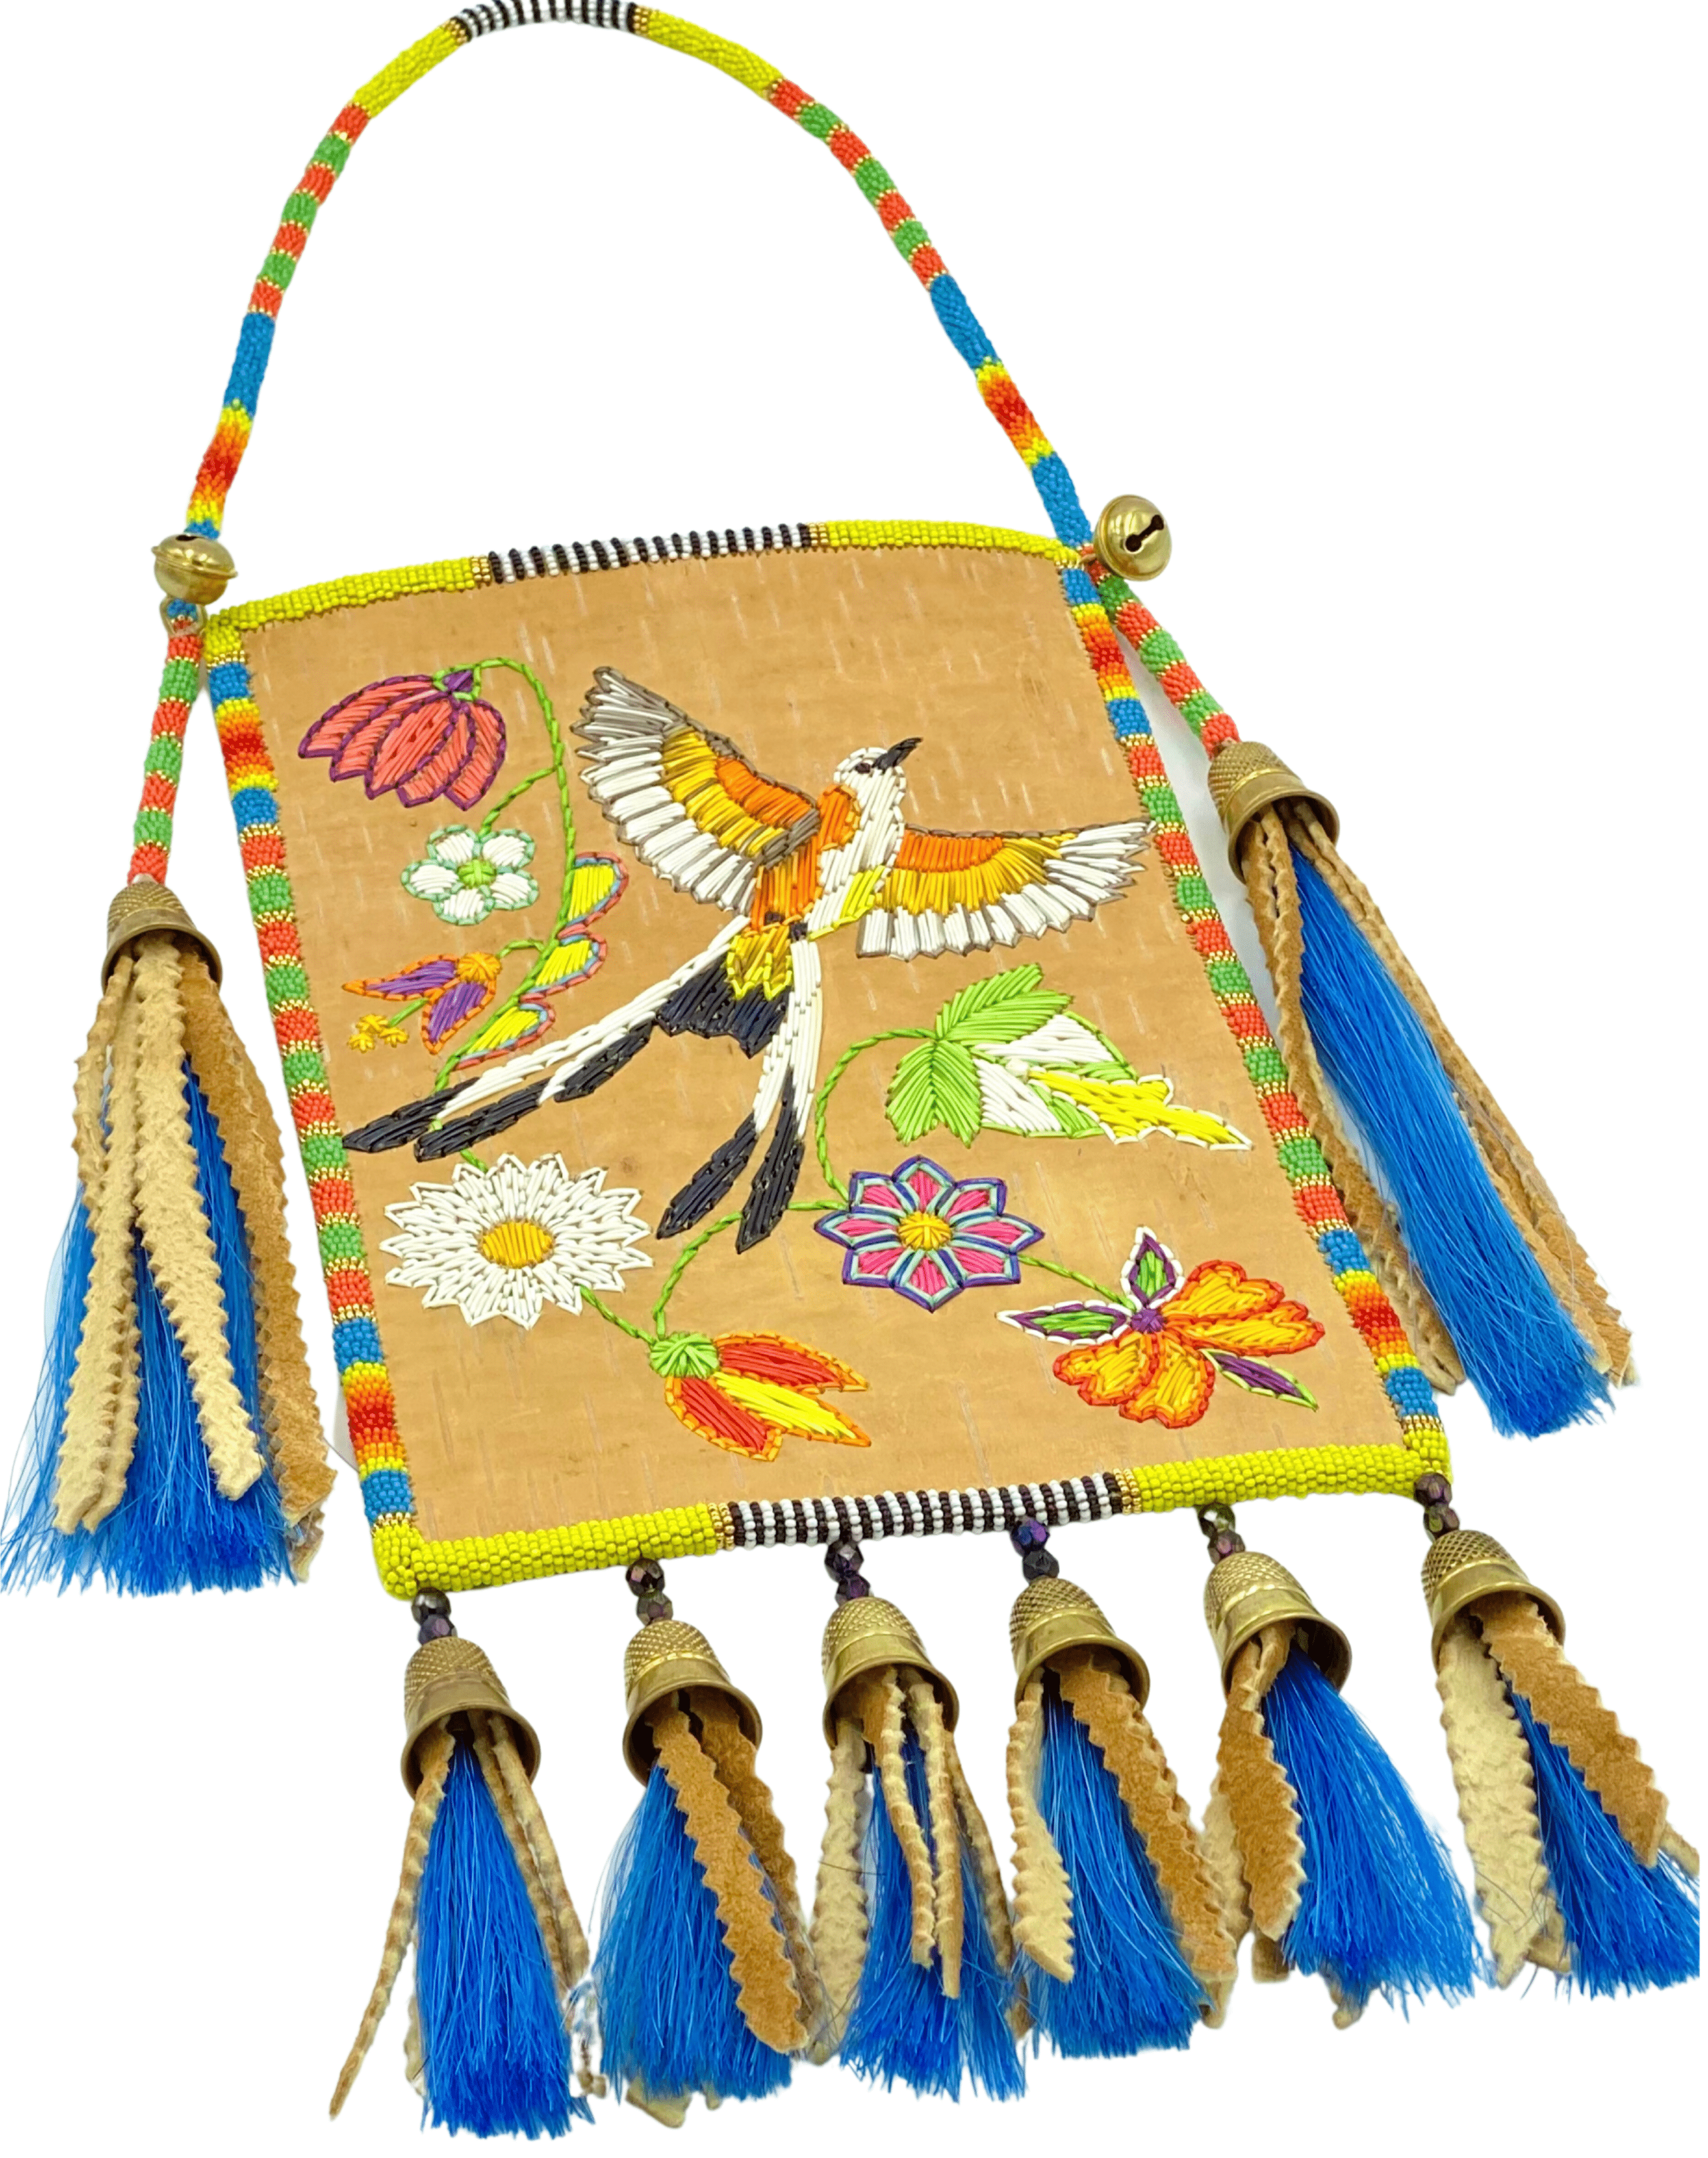 Monica Jo Raphael, Nuh-Mah-Nuh Daawina Akiin (Homelands of the Comanche People), 2020, birch bark, natural and dyed porcupine quills, antique and 24k gold Czech seed beads, antique brass thimbles and hawk bells, black fire polished antique glass beads, dyed horsehair, and traditionally brain-tanned and smoked deer hide. Hood Museum of Art, Dartmouth: Purchased through the Phyllis and Bertram Geller 1937 Memorial Fund; 2022.59. Image courtesy of the artist. © Monica Jo Raphael